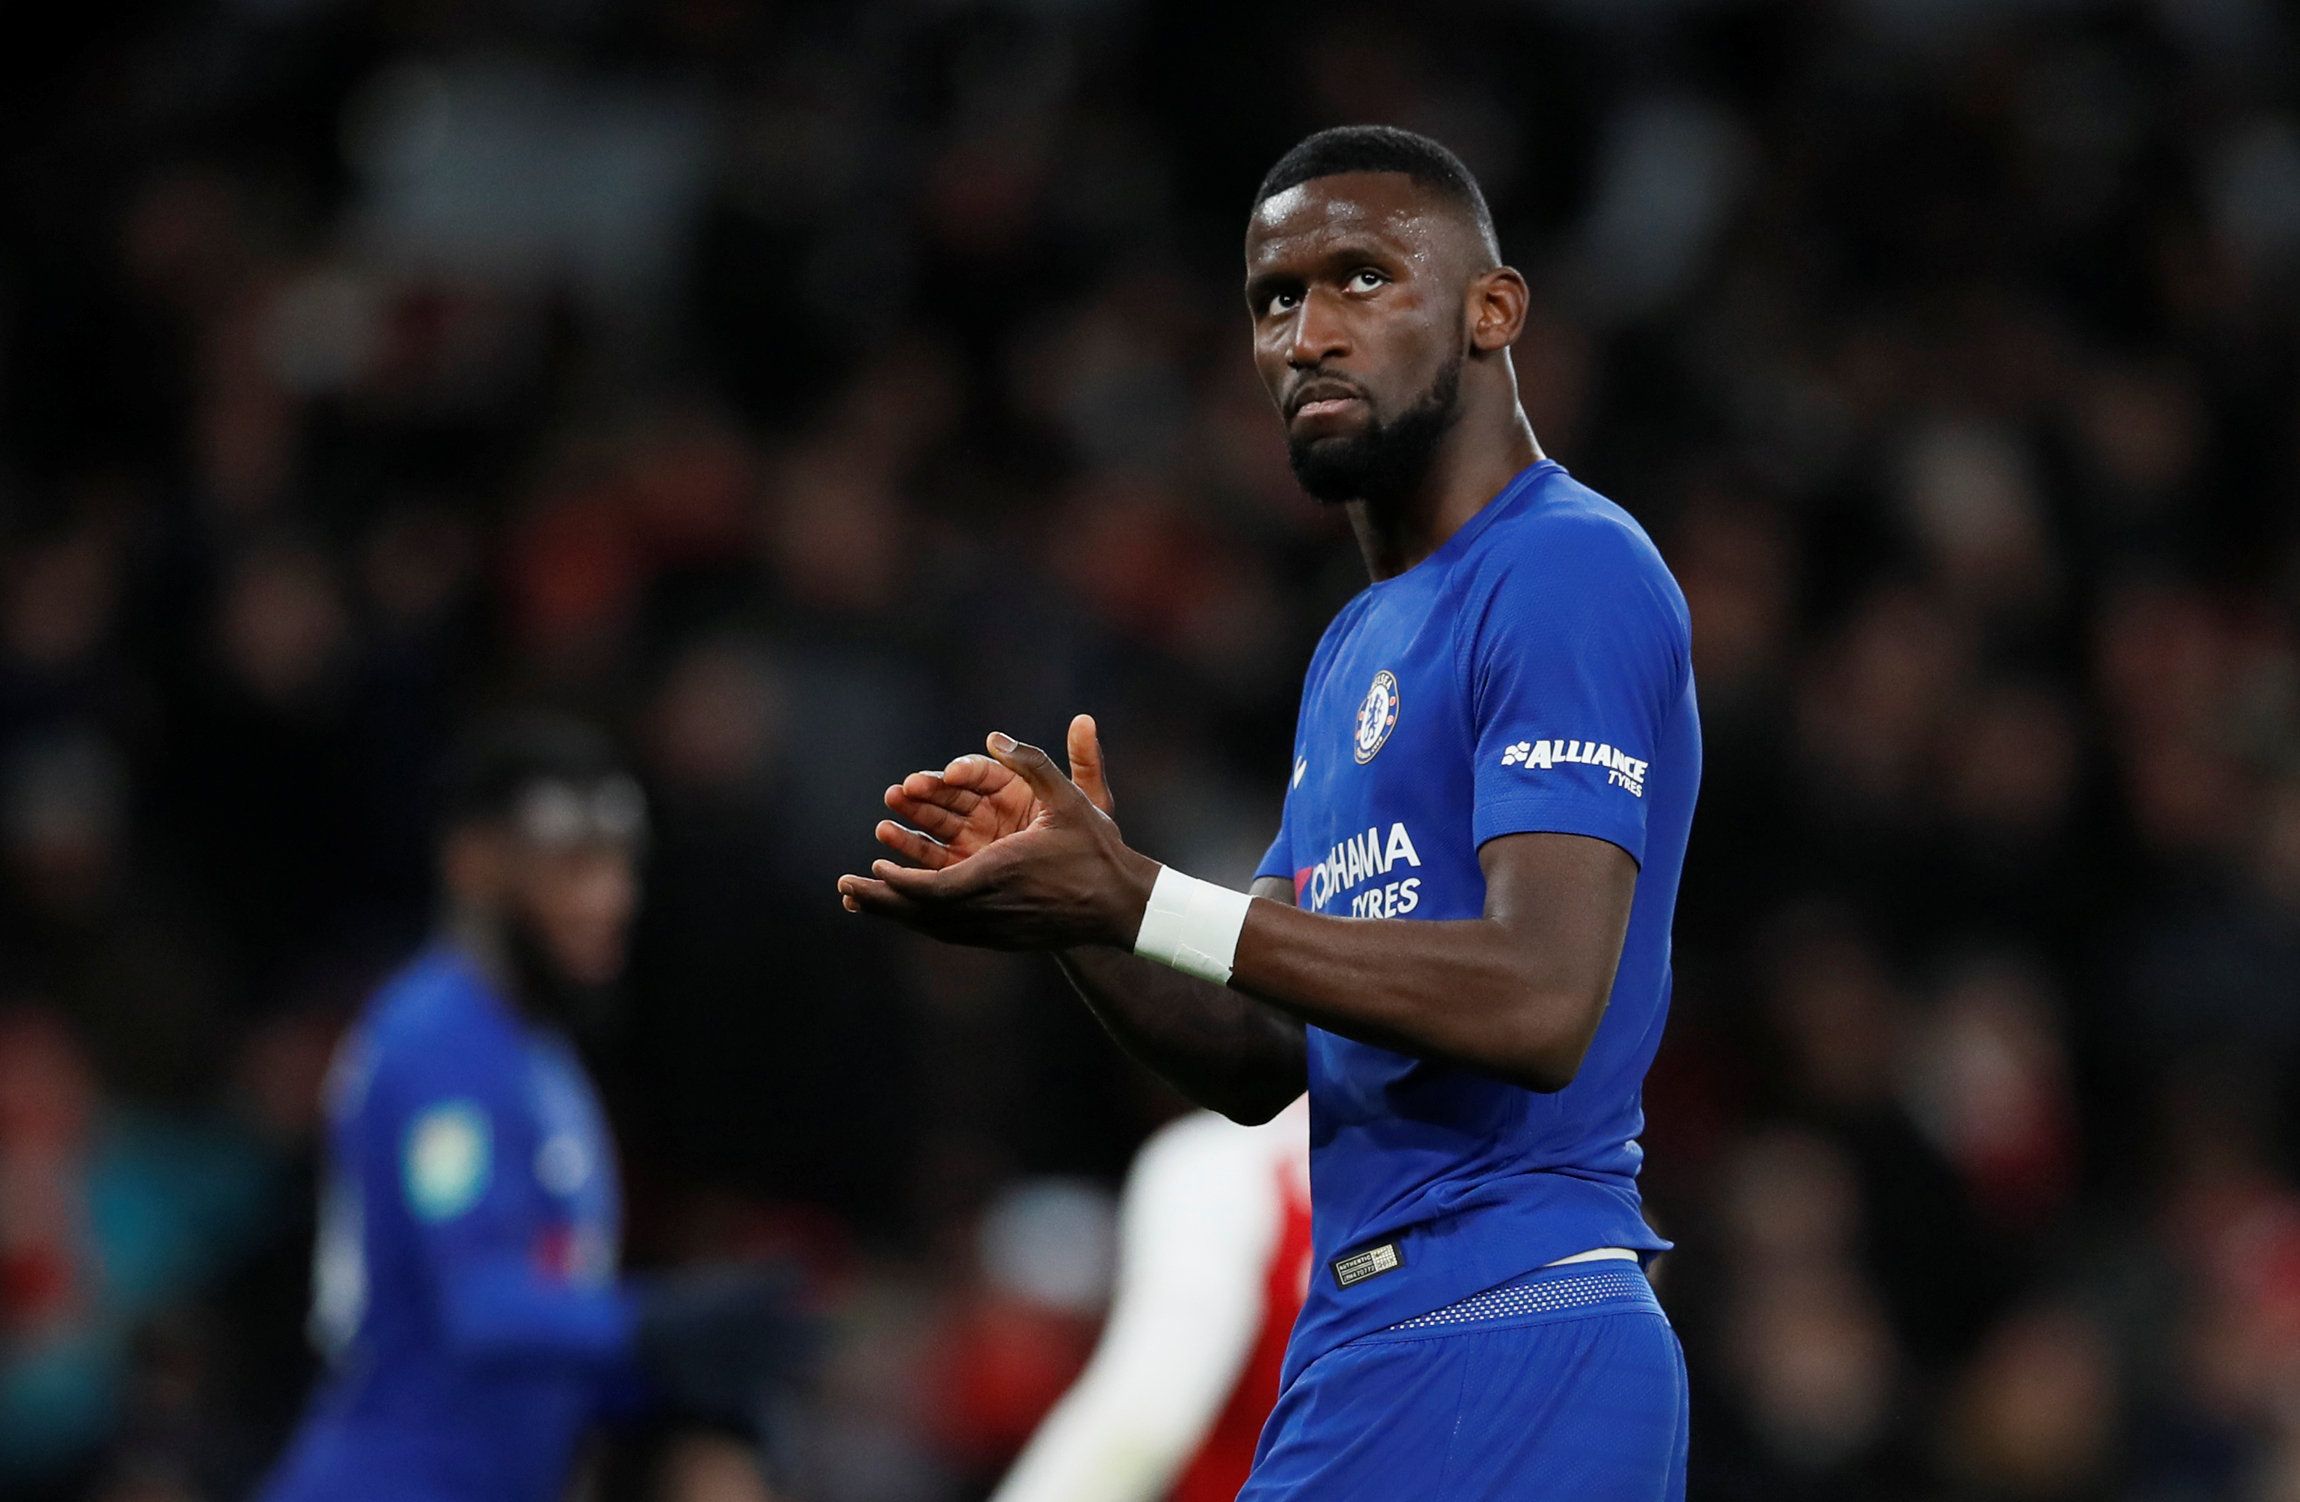 Soccer Football - Carabao Cup Semi Final Second Leg - Arsenal vs Chelsea - Emirates Stadium, London, Britain - January 24, 2018   Chelsea's Antonio Rudiger applauds fans after the match    REUTERS/David Klein    EDITORIAL USE ONLY. No use with unauthorized audio, video, data, fixture lists, club/league logos or 